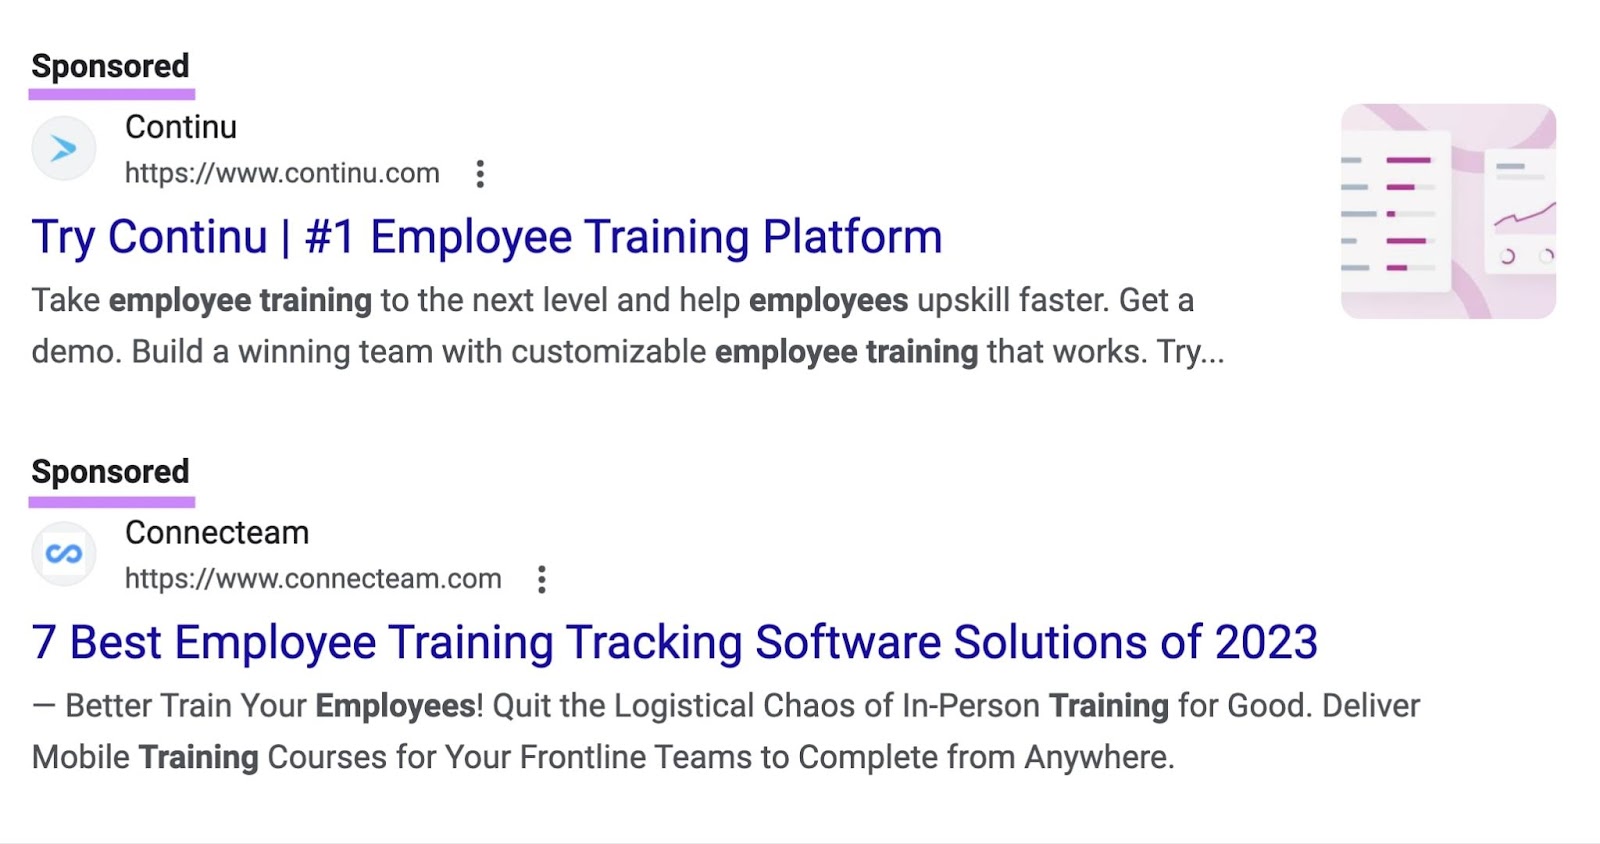 Paid ads on Google for “how to track employee training" query